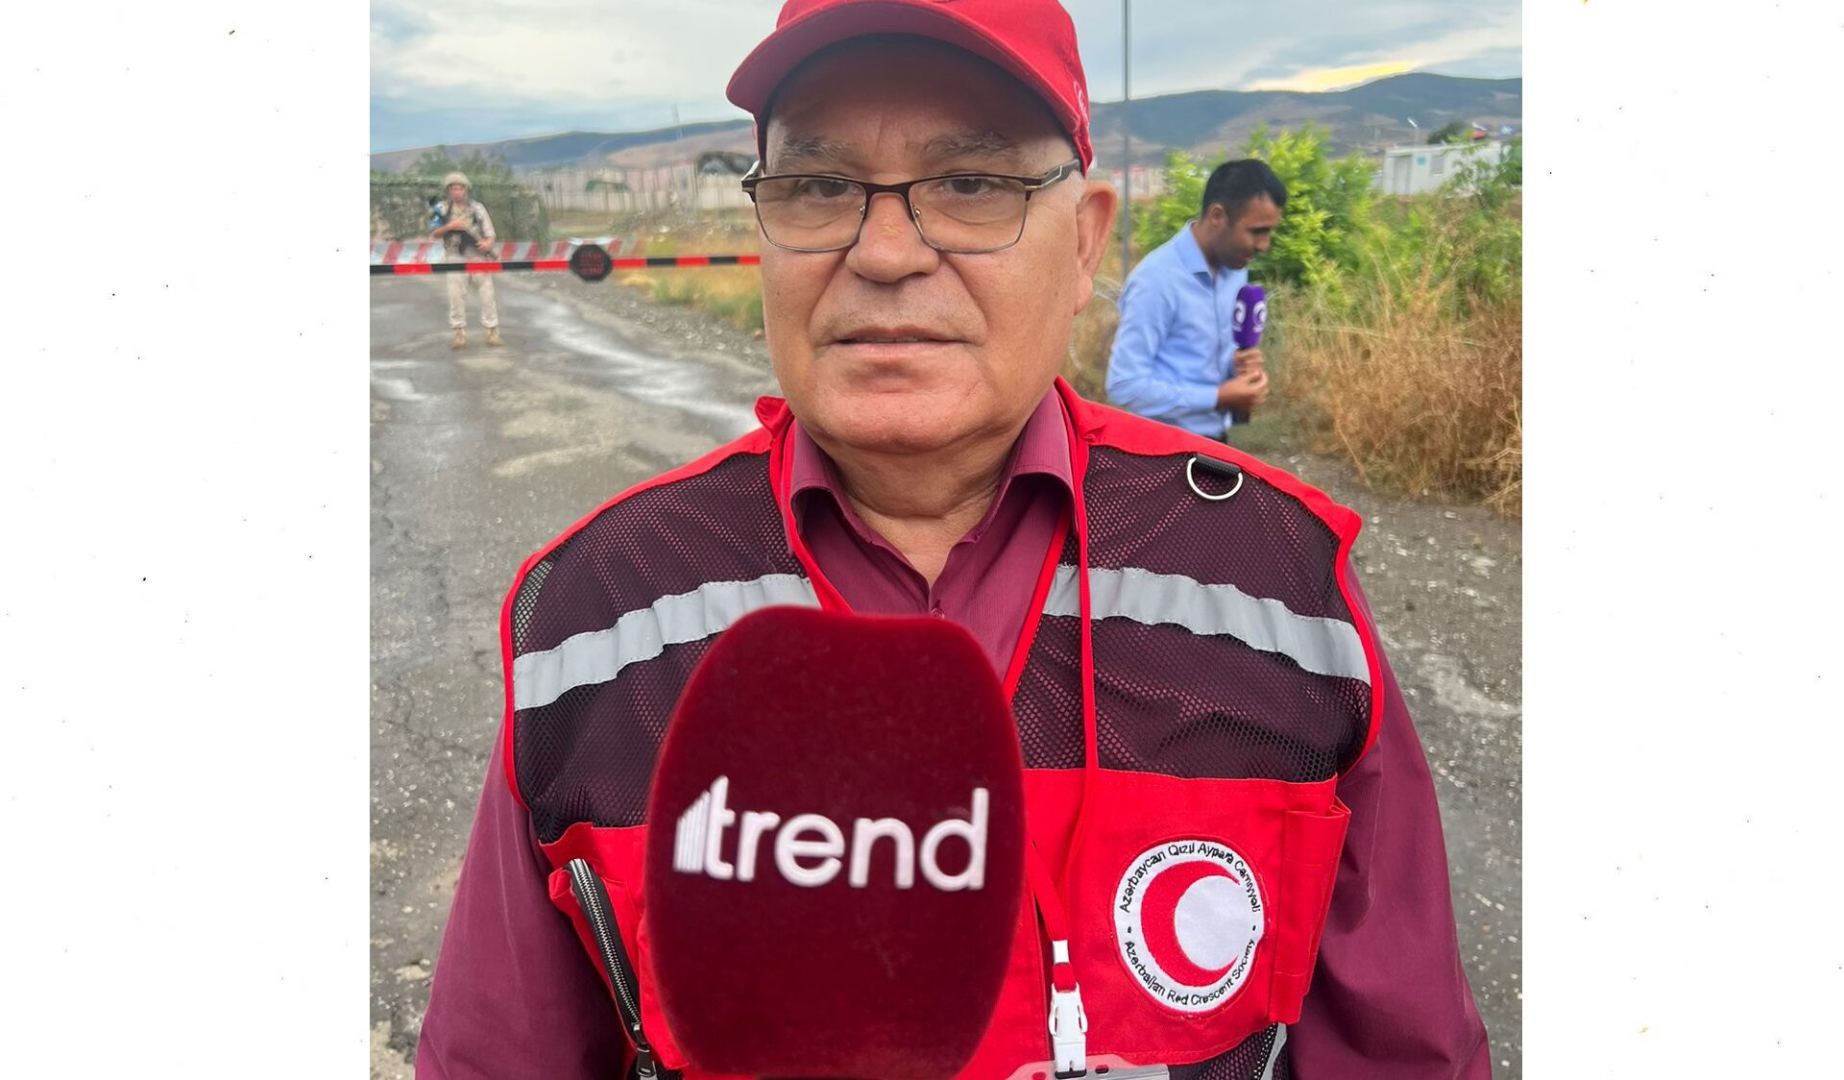 Humanitarian convoy from Baku in Aghdam waiting for response from Armenians - Red Crescent Society rep